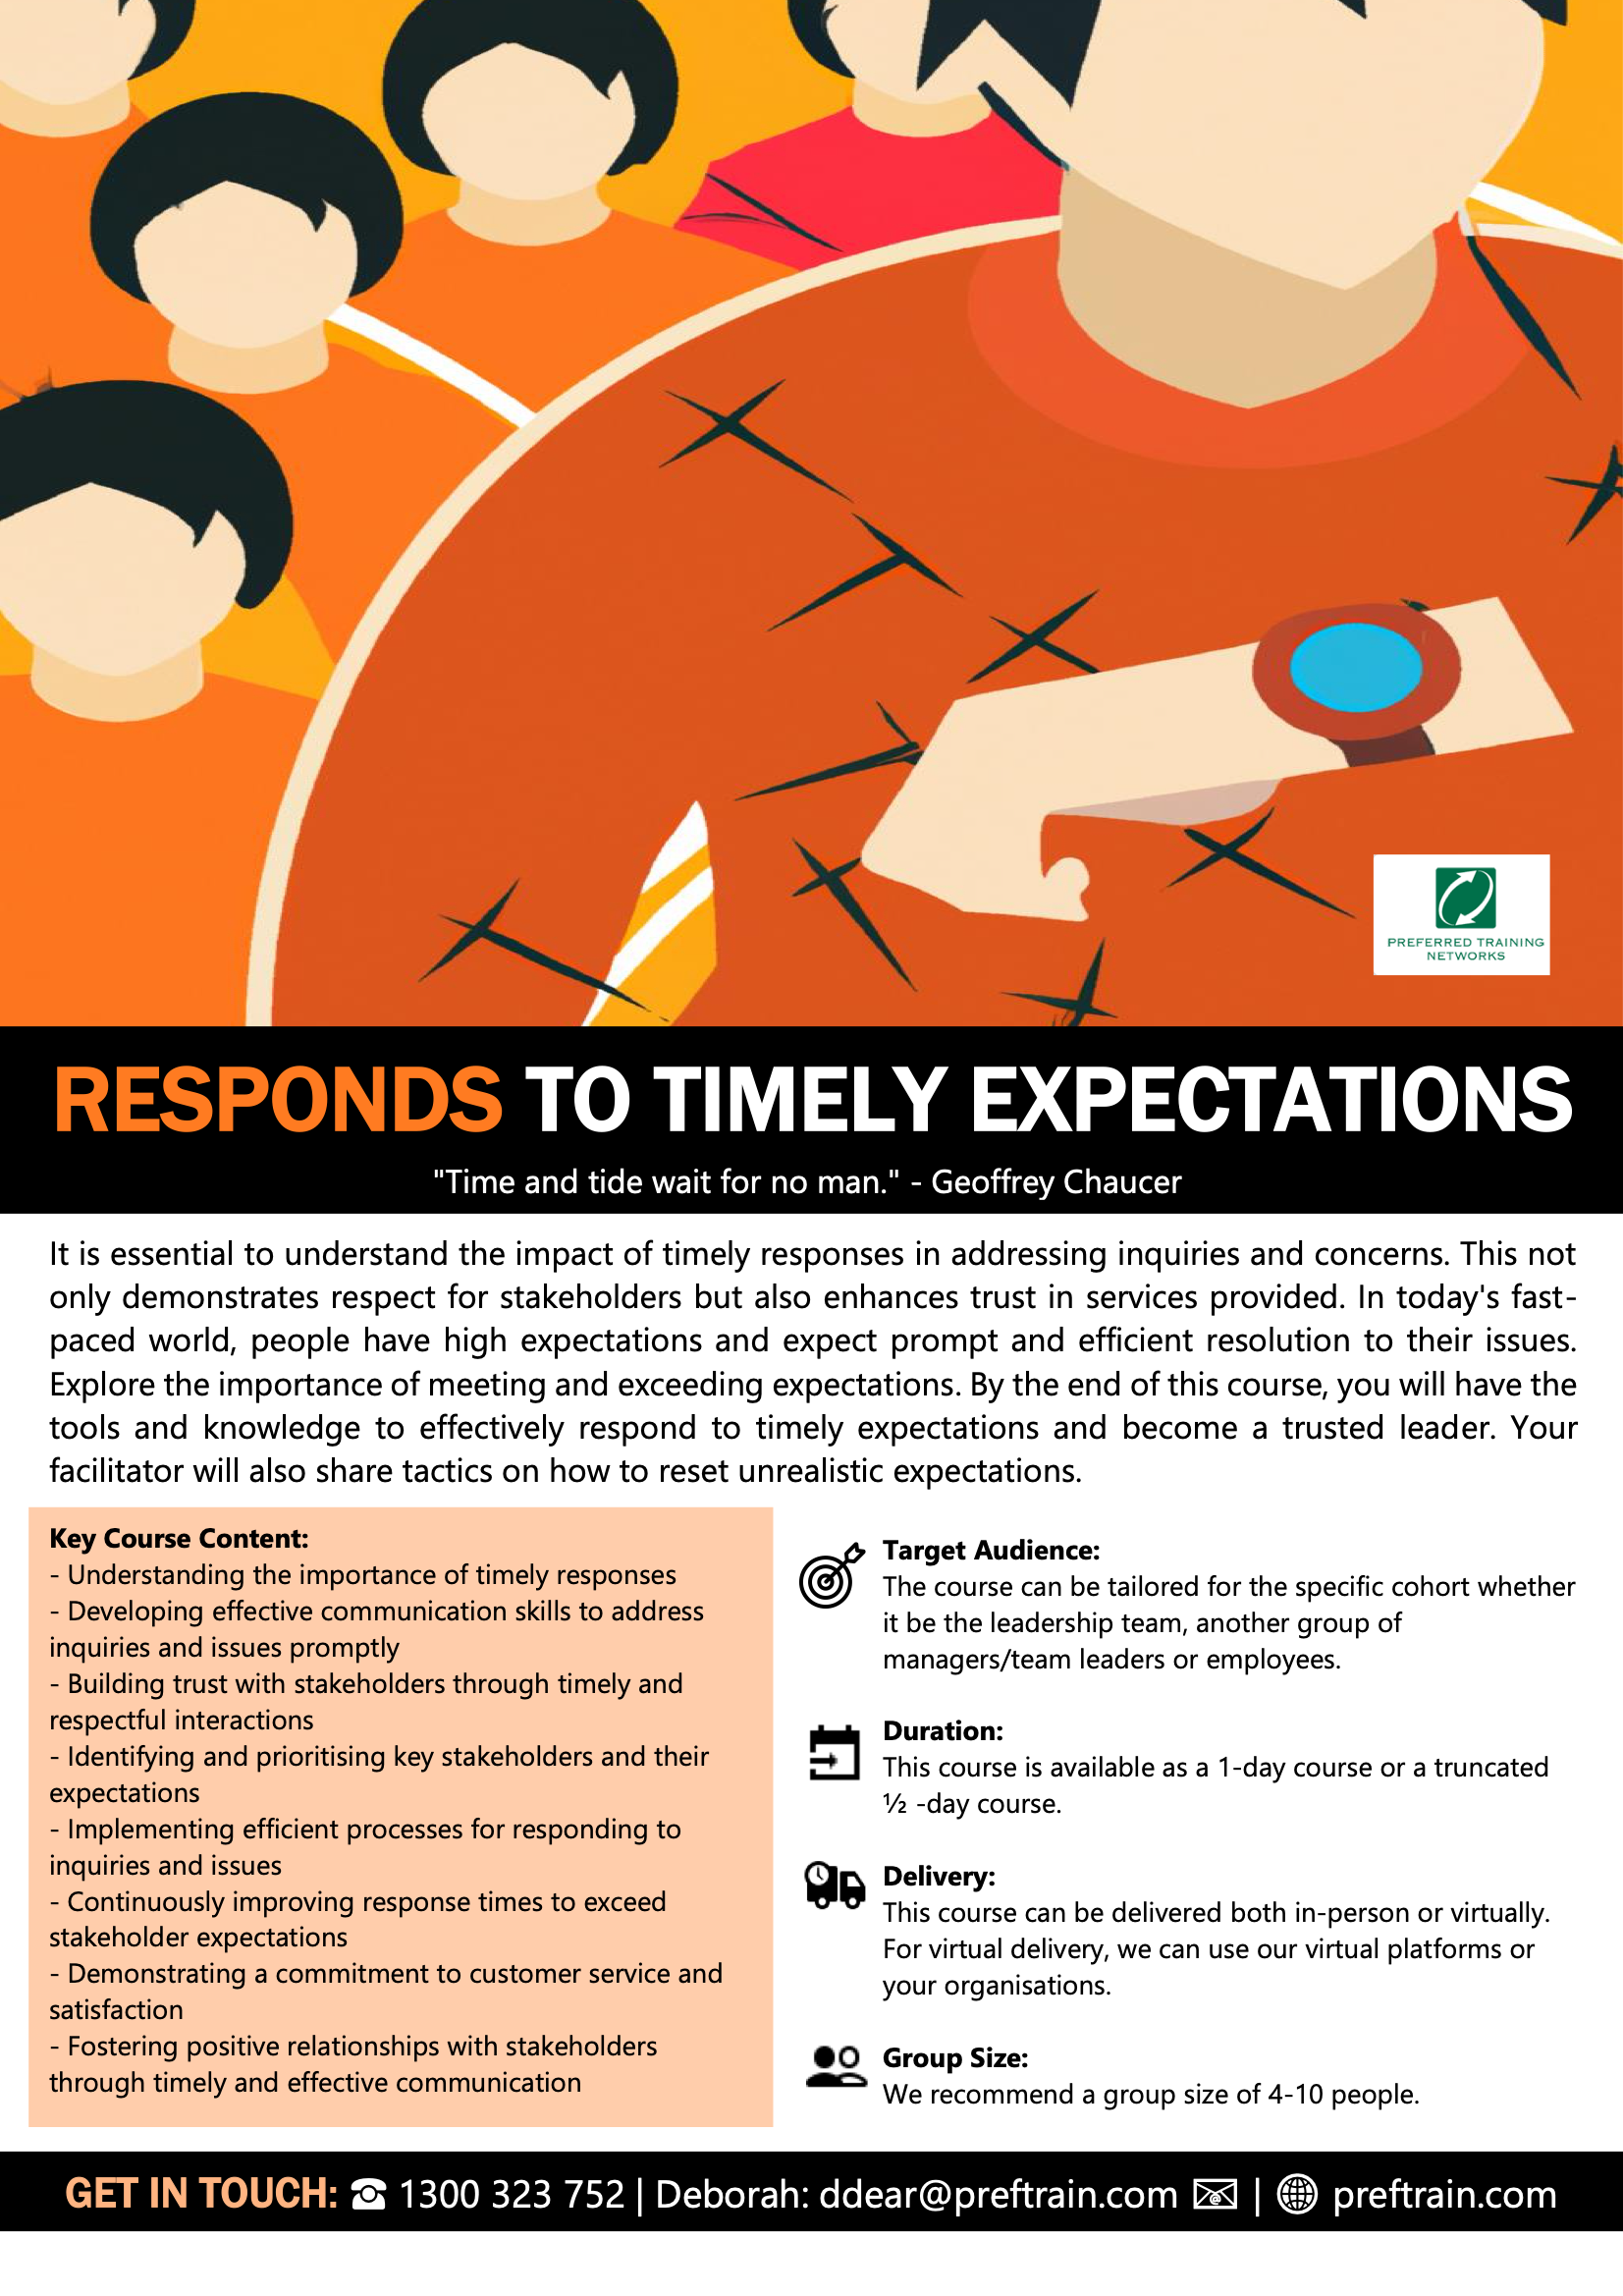 Responds to Timely Expectations